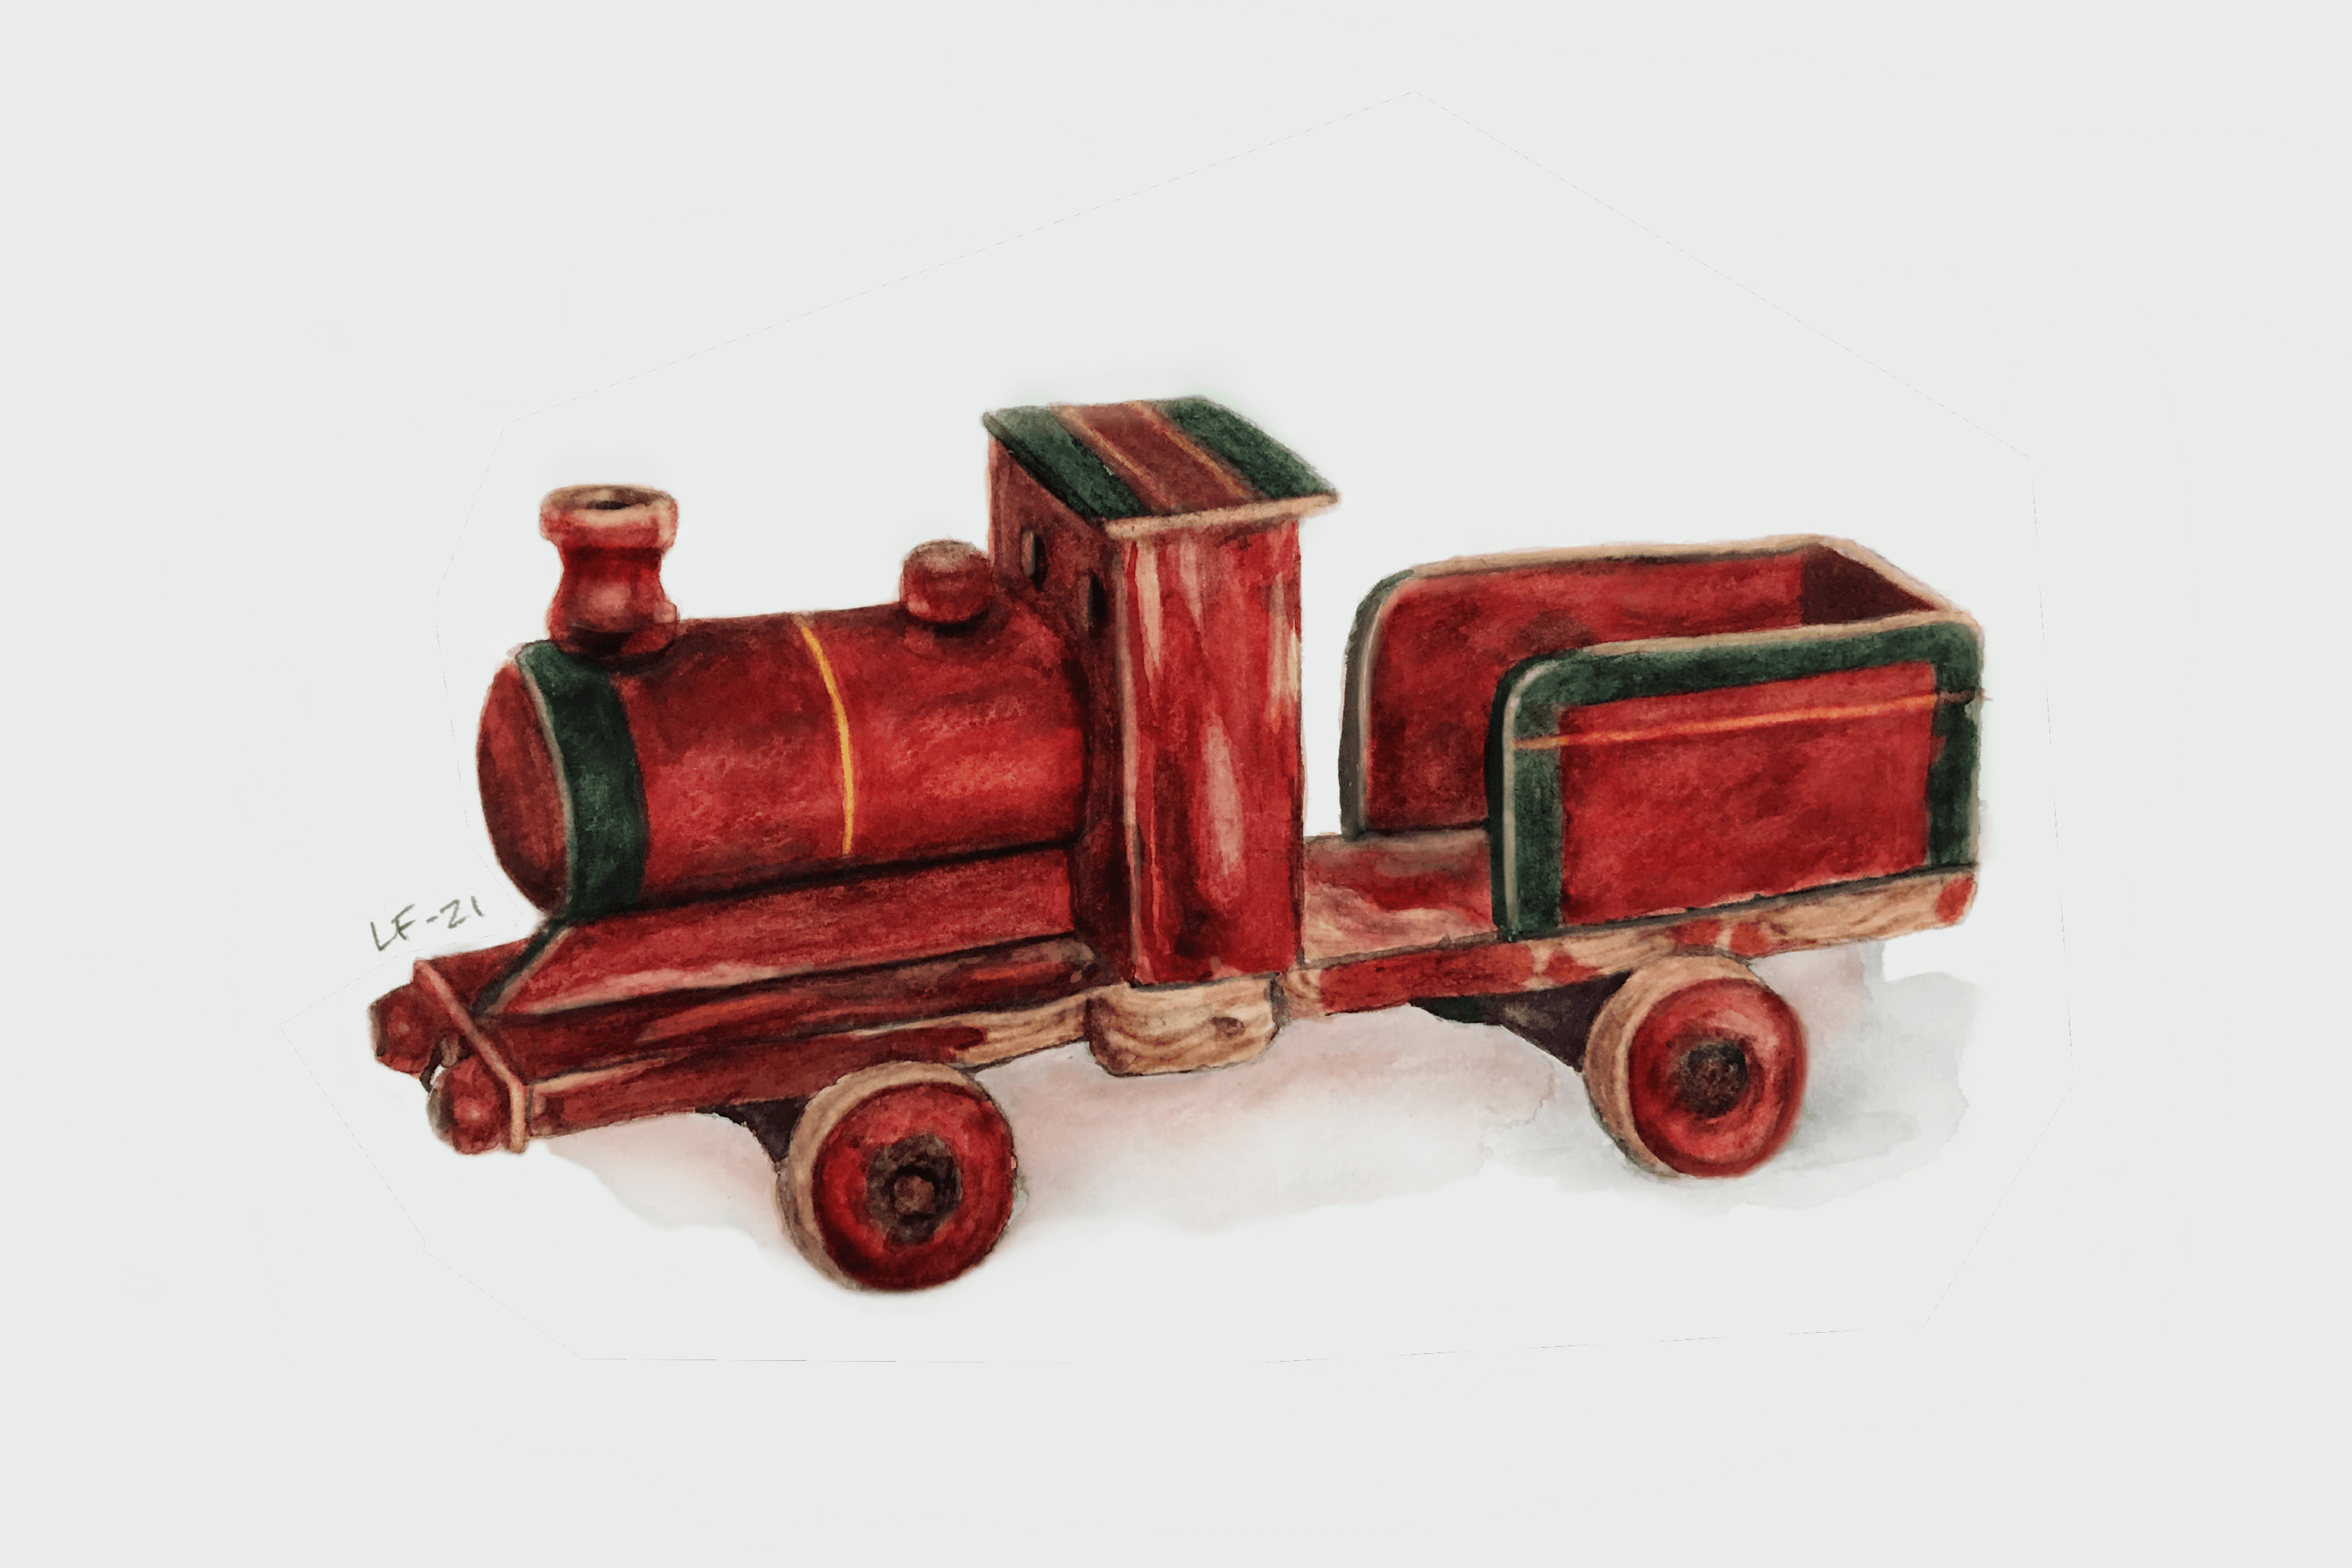 #5 The Homemade Toy Train